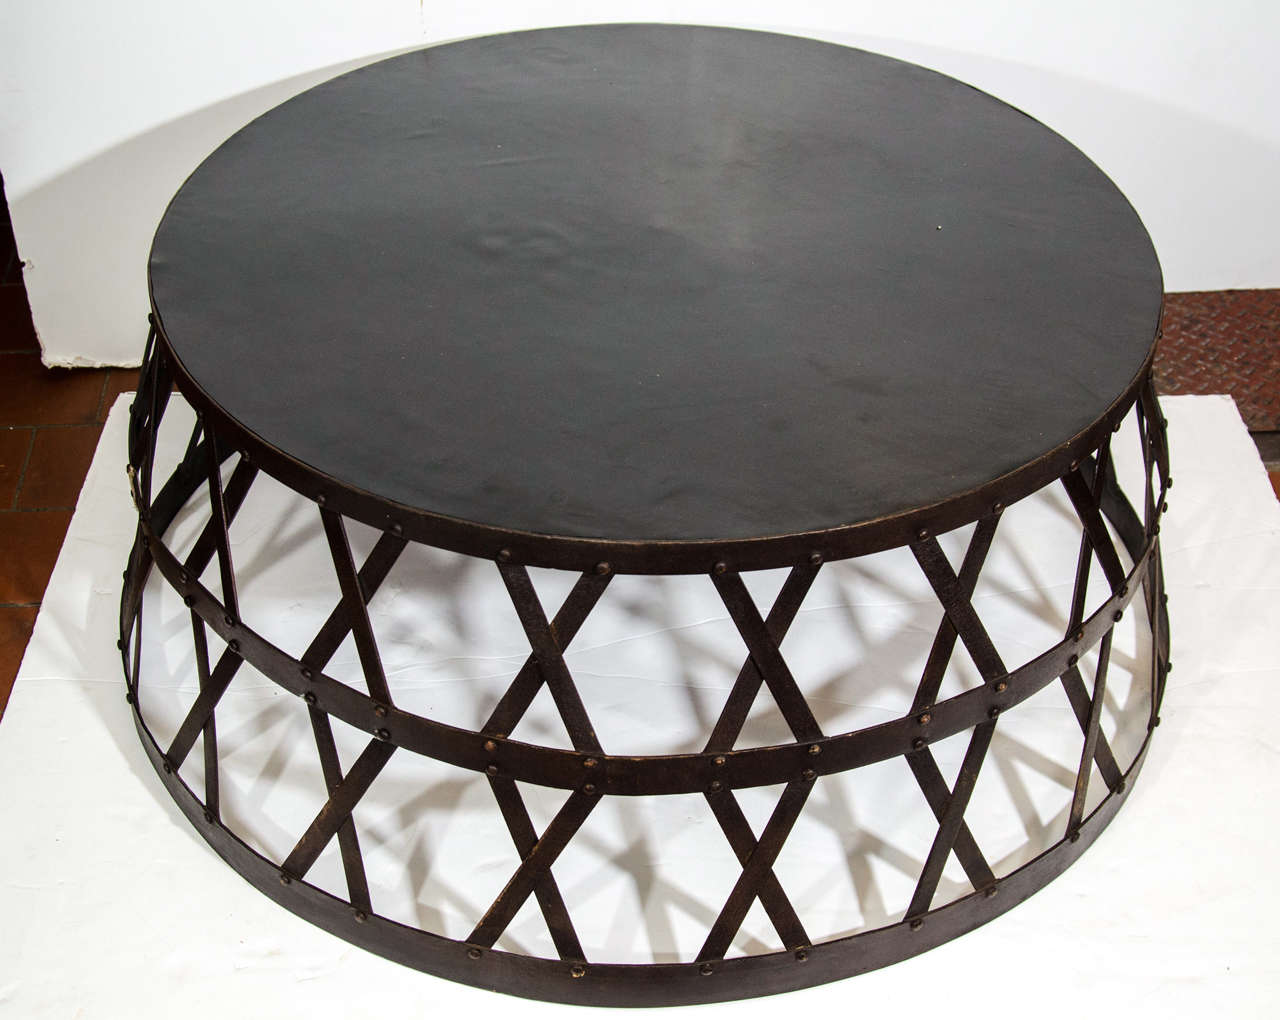 Elephant drum table with rubber top and a metal crisscross design.